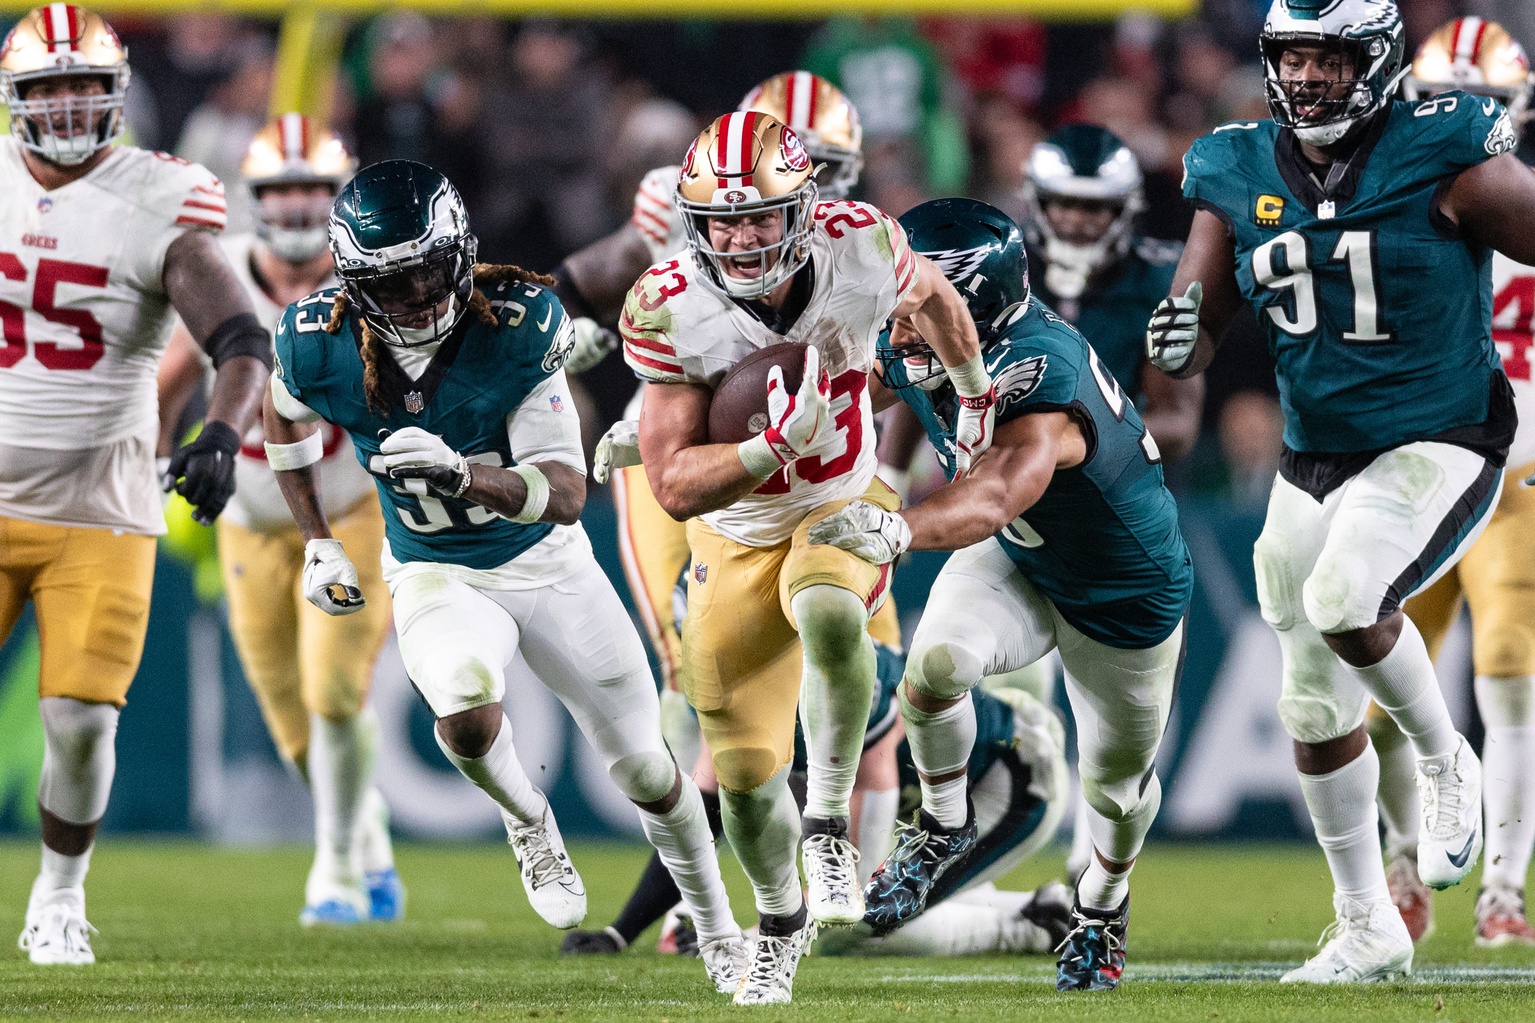 San Francisco 49ers running back Christian McCaffrey (23) runs with the ball against the Philadelphia Eagles during the third quarter at Lincoln Financial Field.